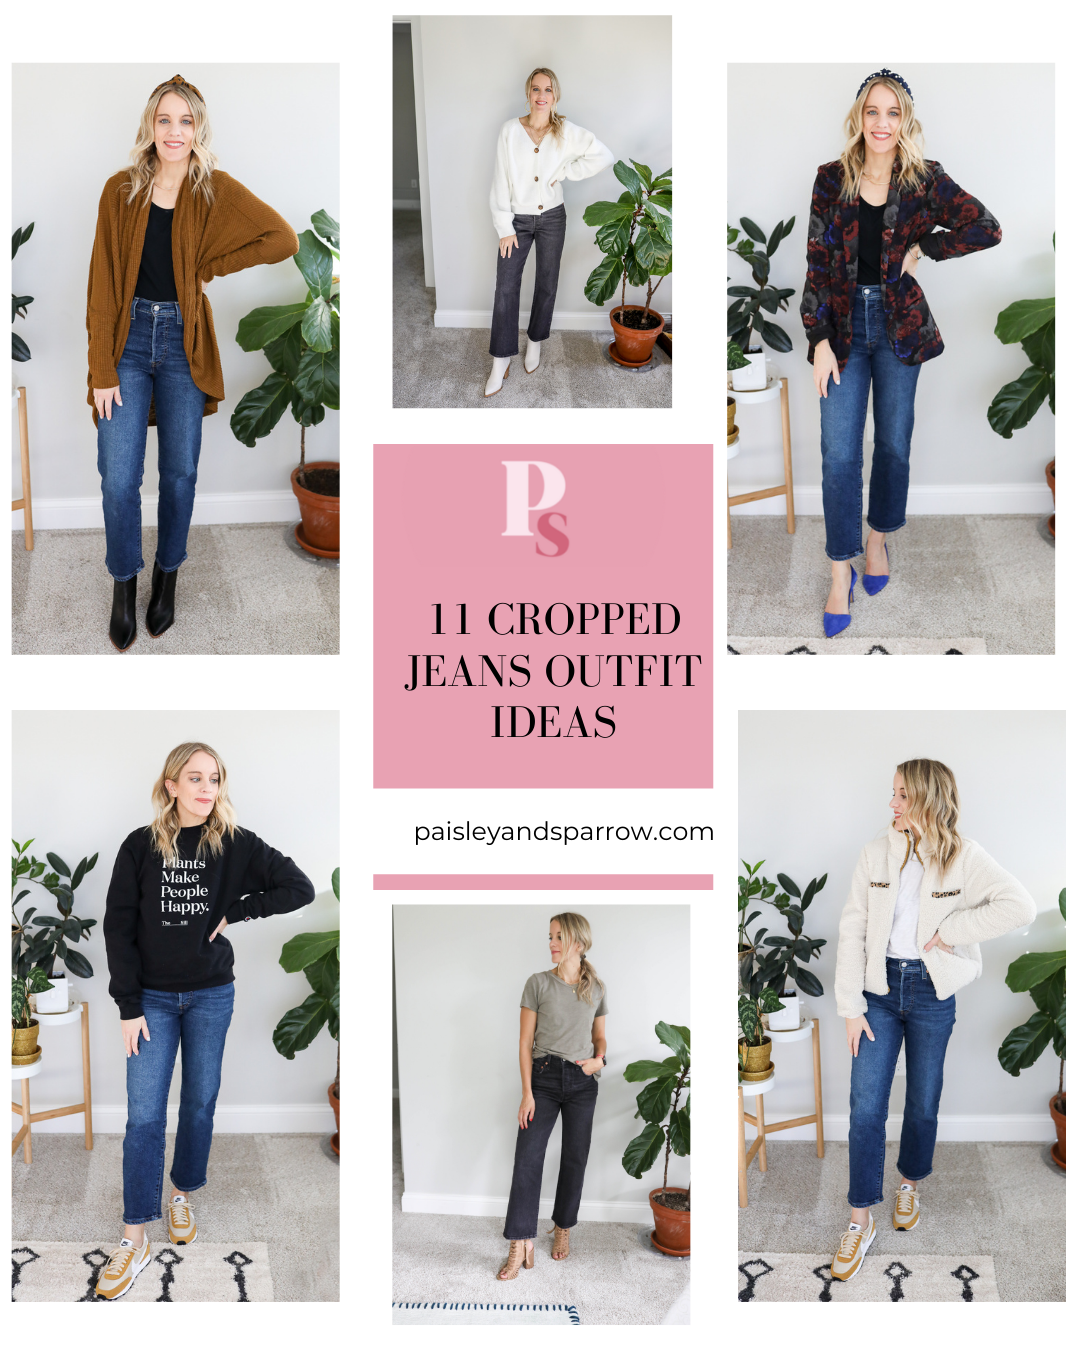 How to Wear Cropped Jeans (11 Outfit Ideas!) - Paisley & Sparrow